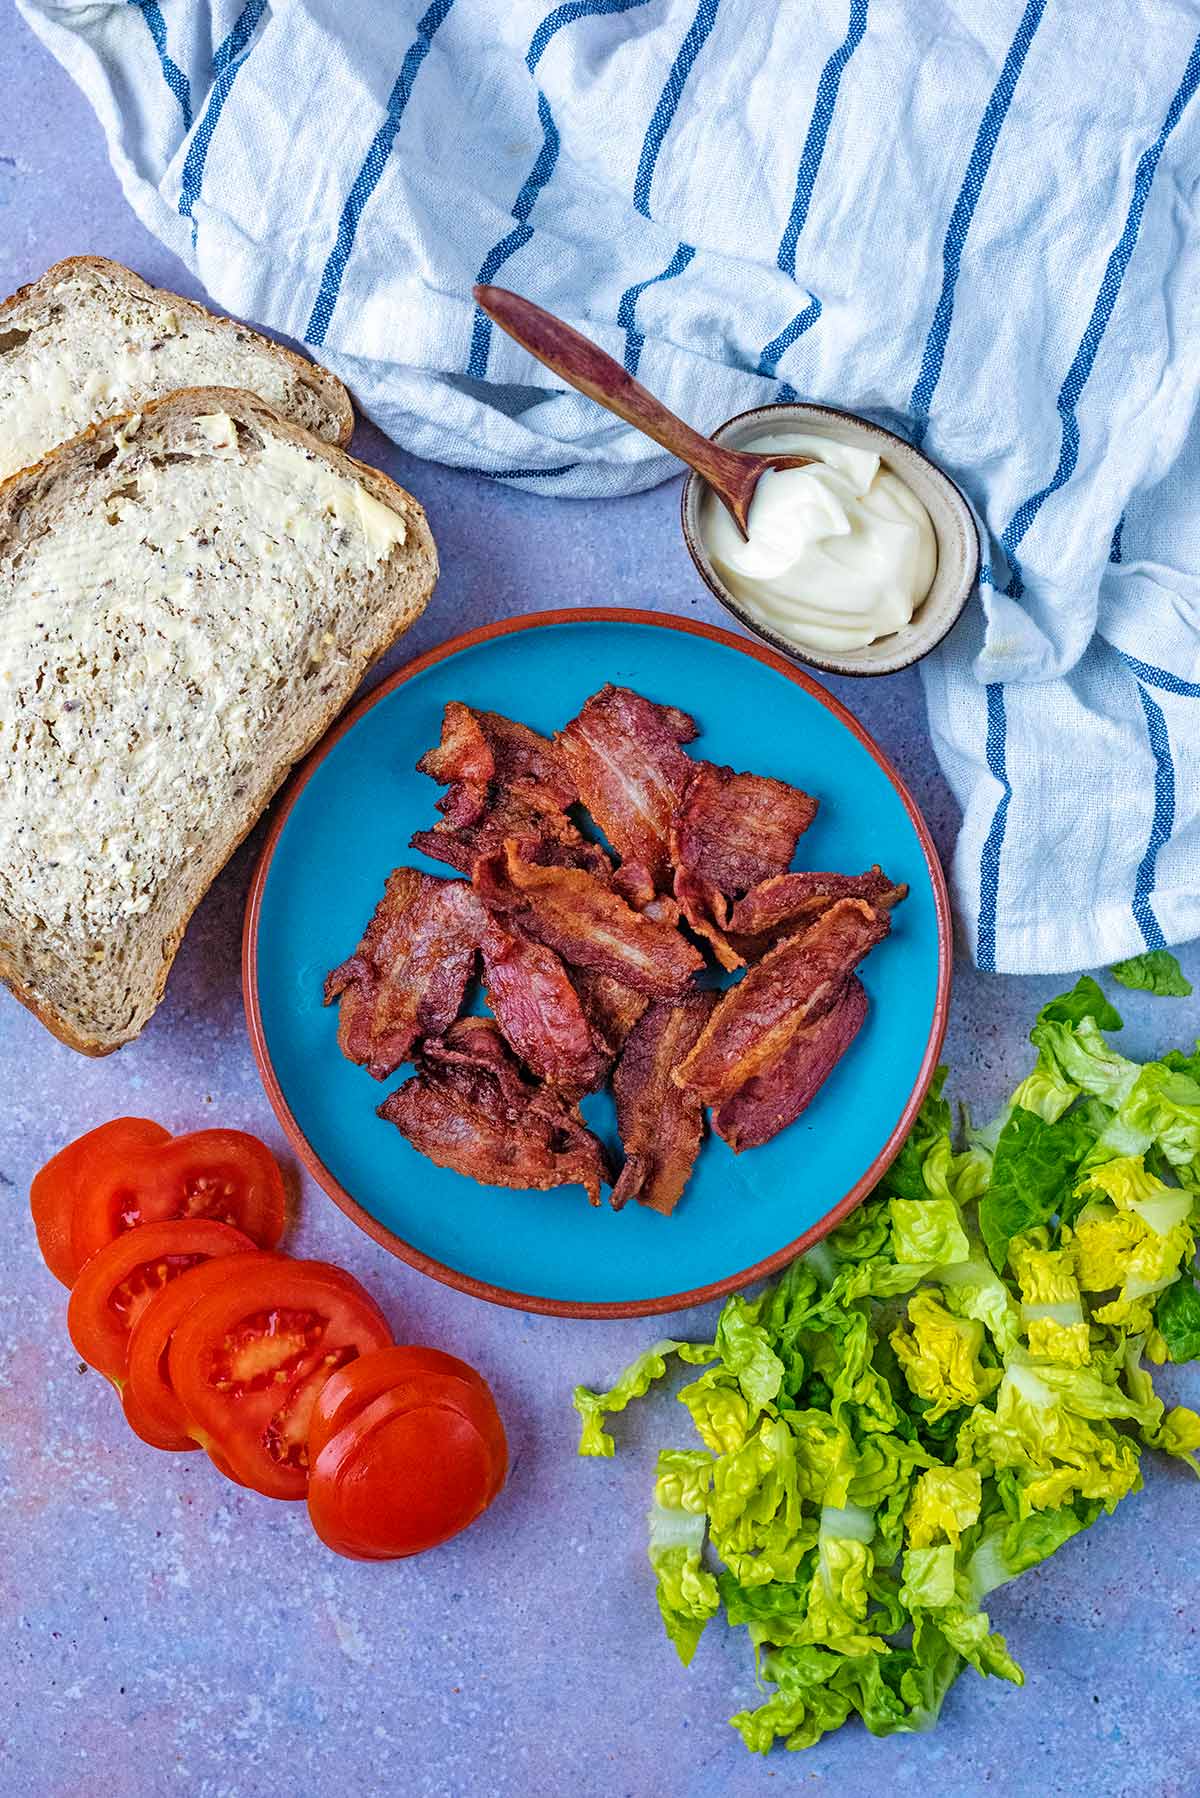 A plate of bacon next to buttered bread, lettuce and sliced tomatoes.